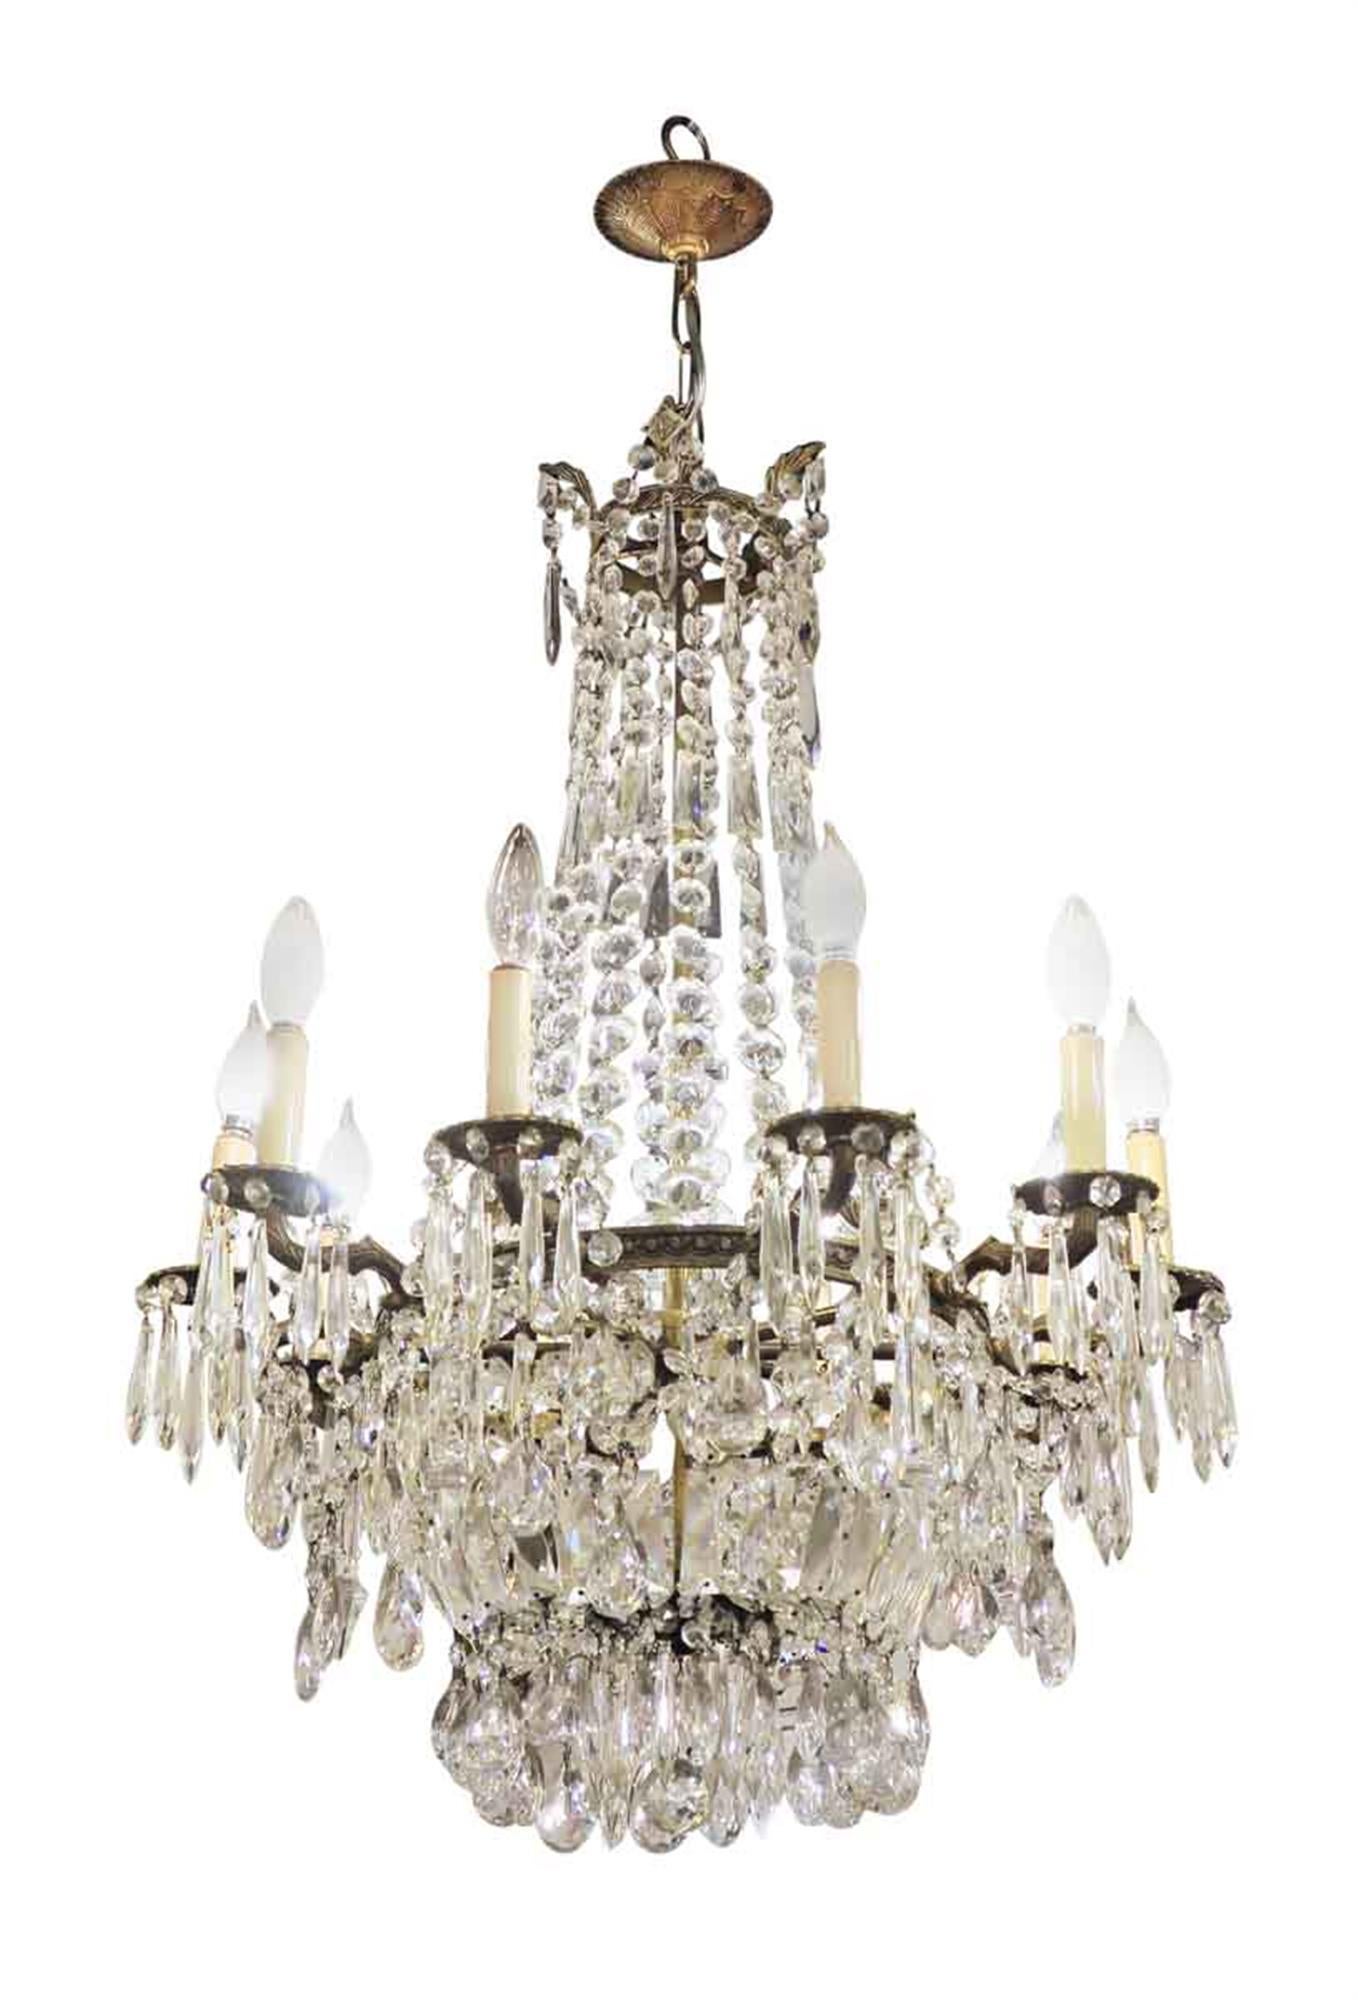 Large-scale elegant crystal chandelier with 10 arms from the 1920s. This can be seen at our 2420 Broadway location on the upper west side in Manhattan.